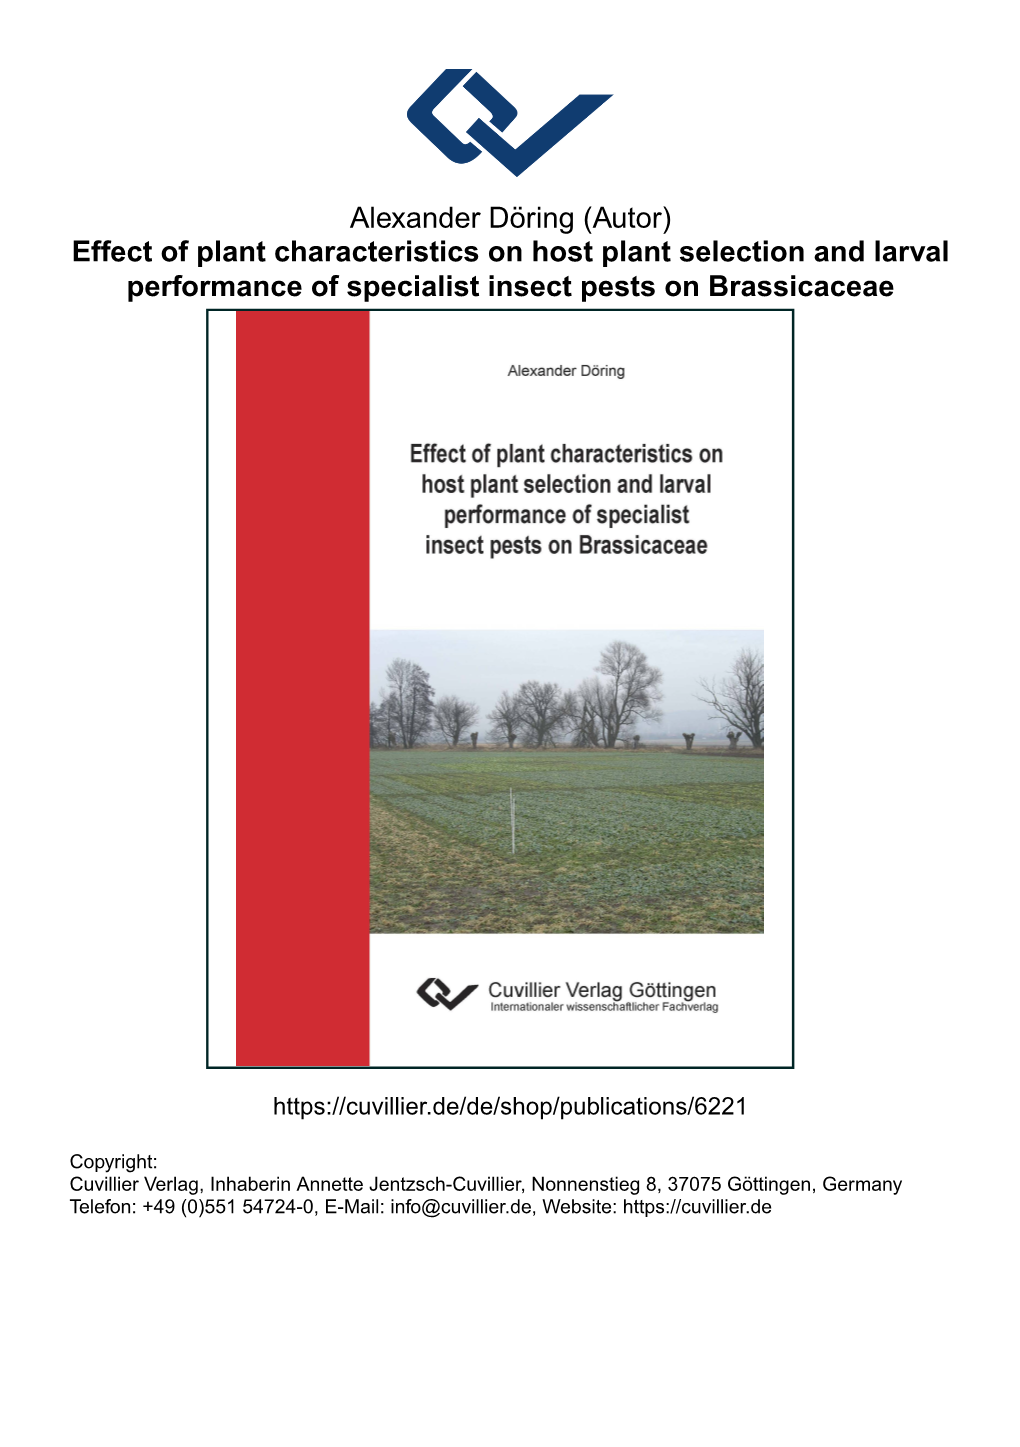 (Autor) Effect of Plant Characteristics on Host Plant Selection and Larval Performance of Specialist Insect Pests on Brassicaceae